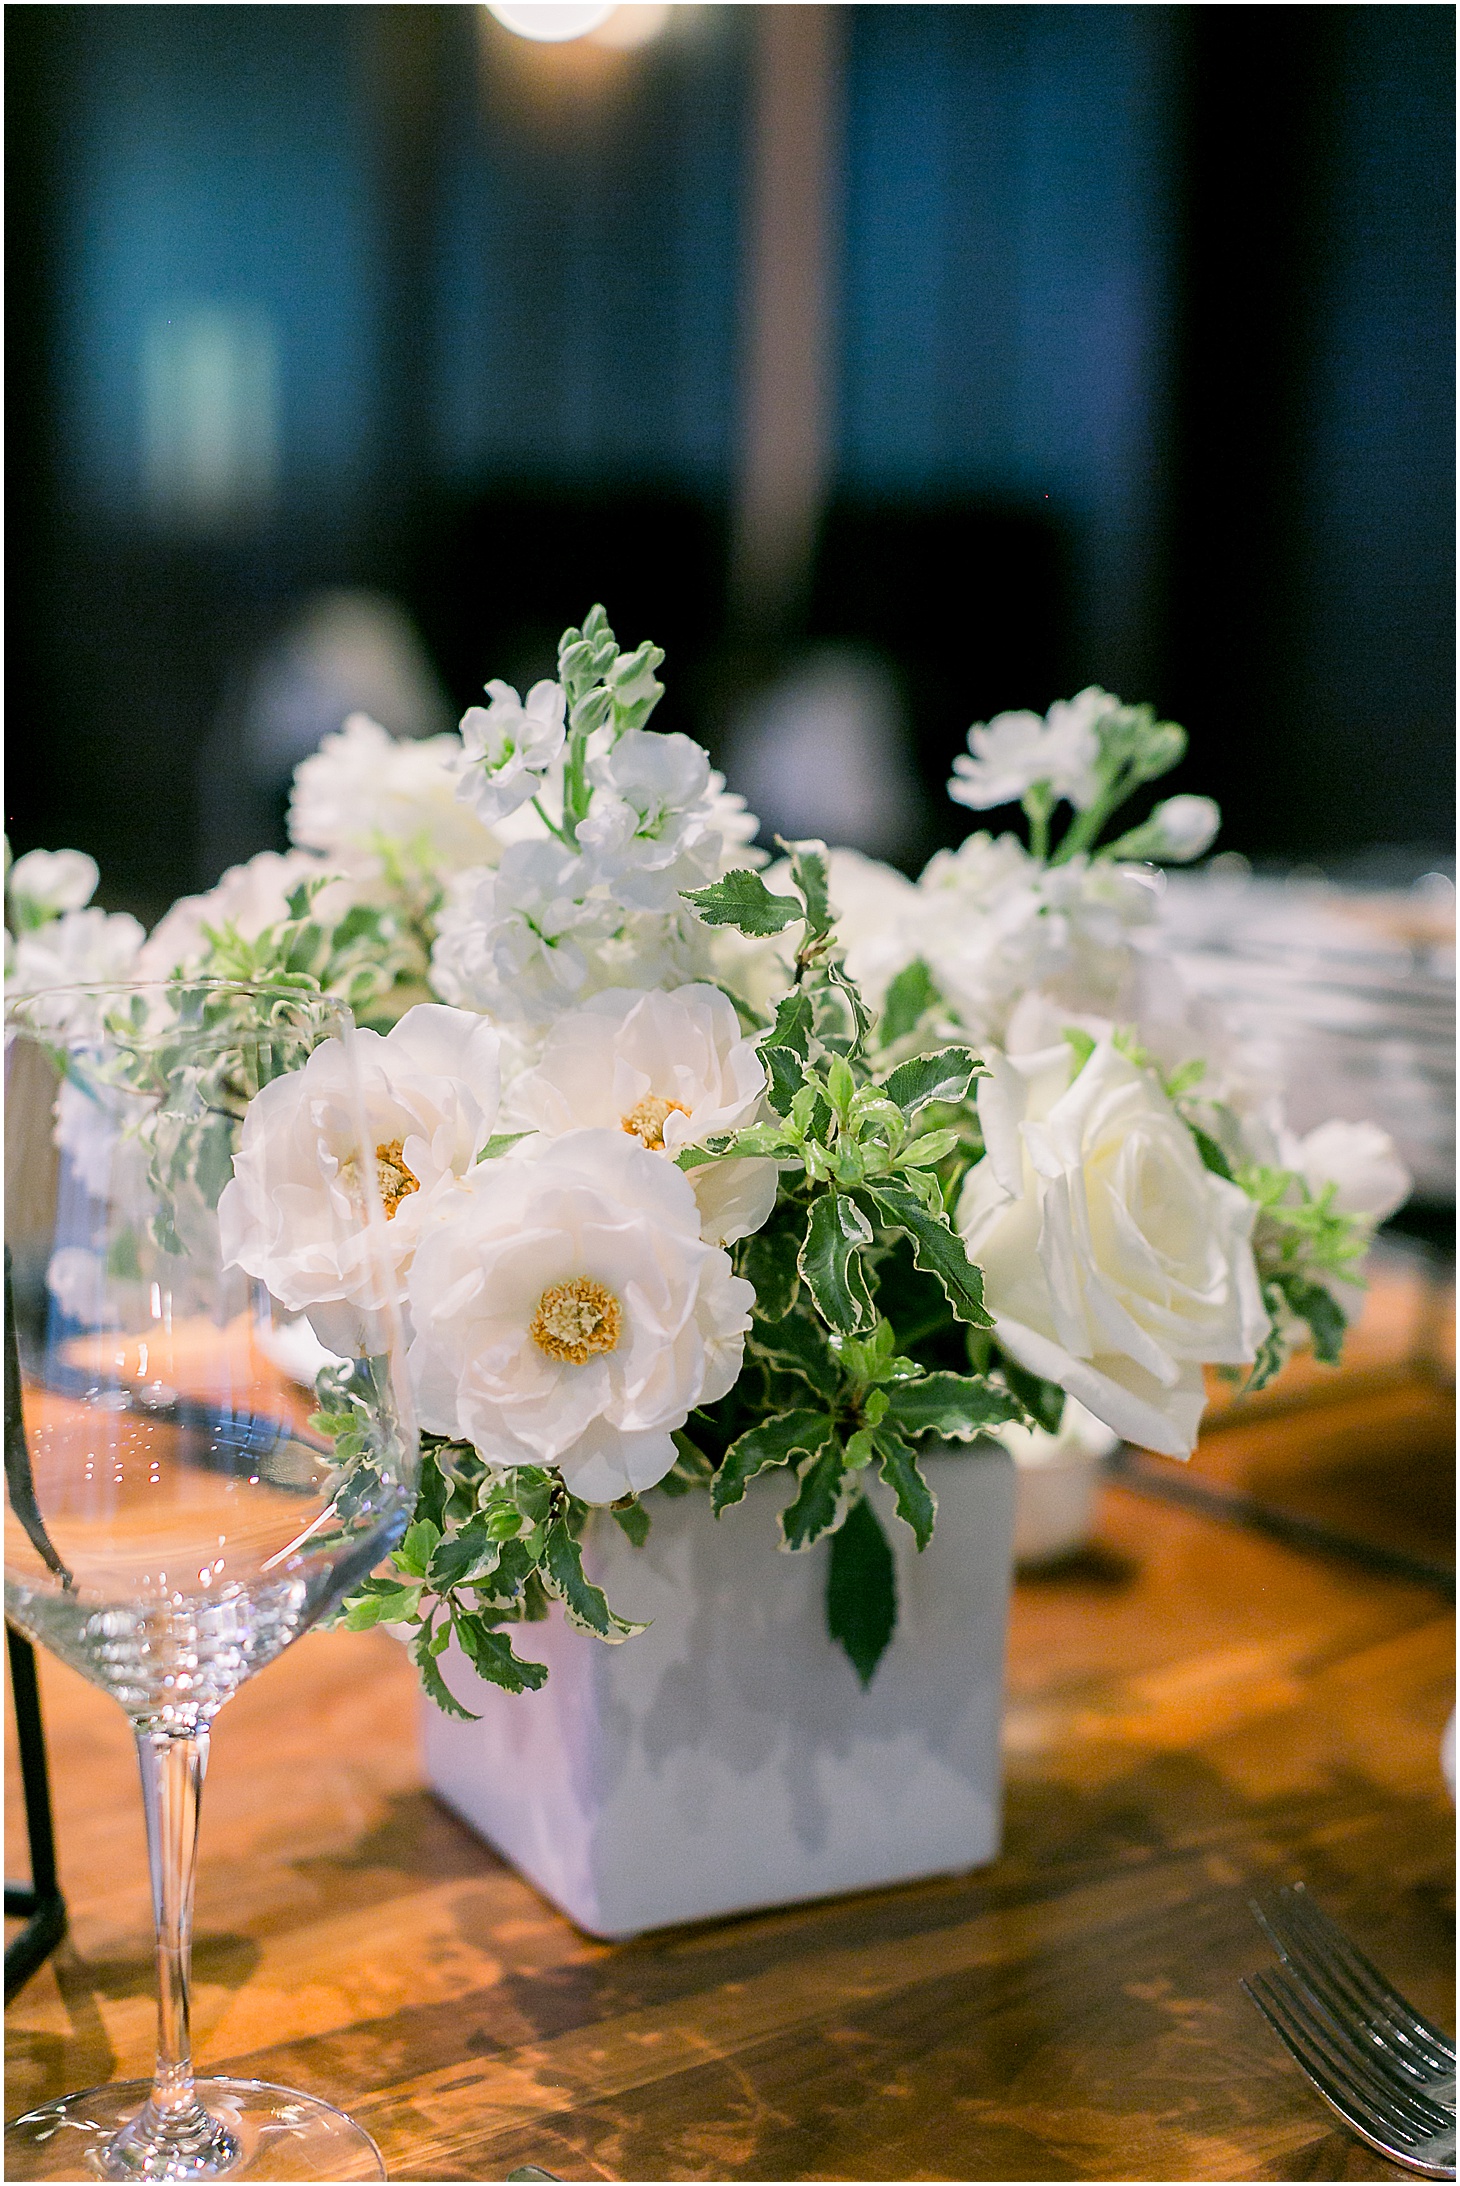 Spring Wedding Reception at District Winery in DC,Modern Textural Spring Wedding at District Winery, Sarah Bradshaw Photography, DC Wedding Photographer